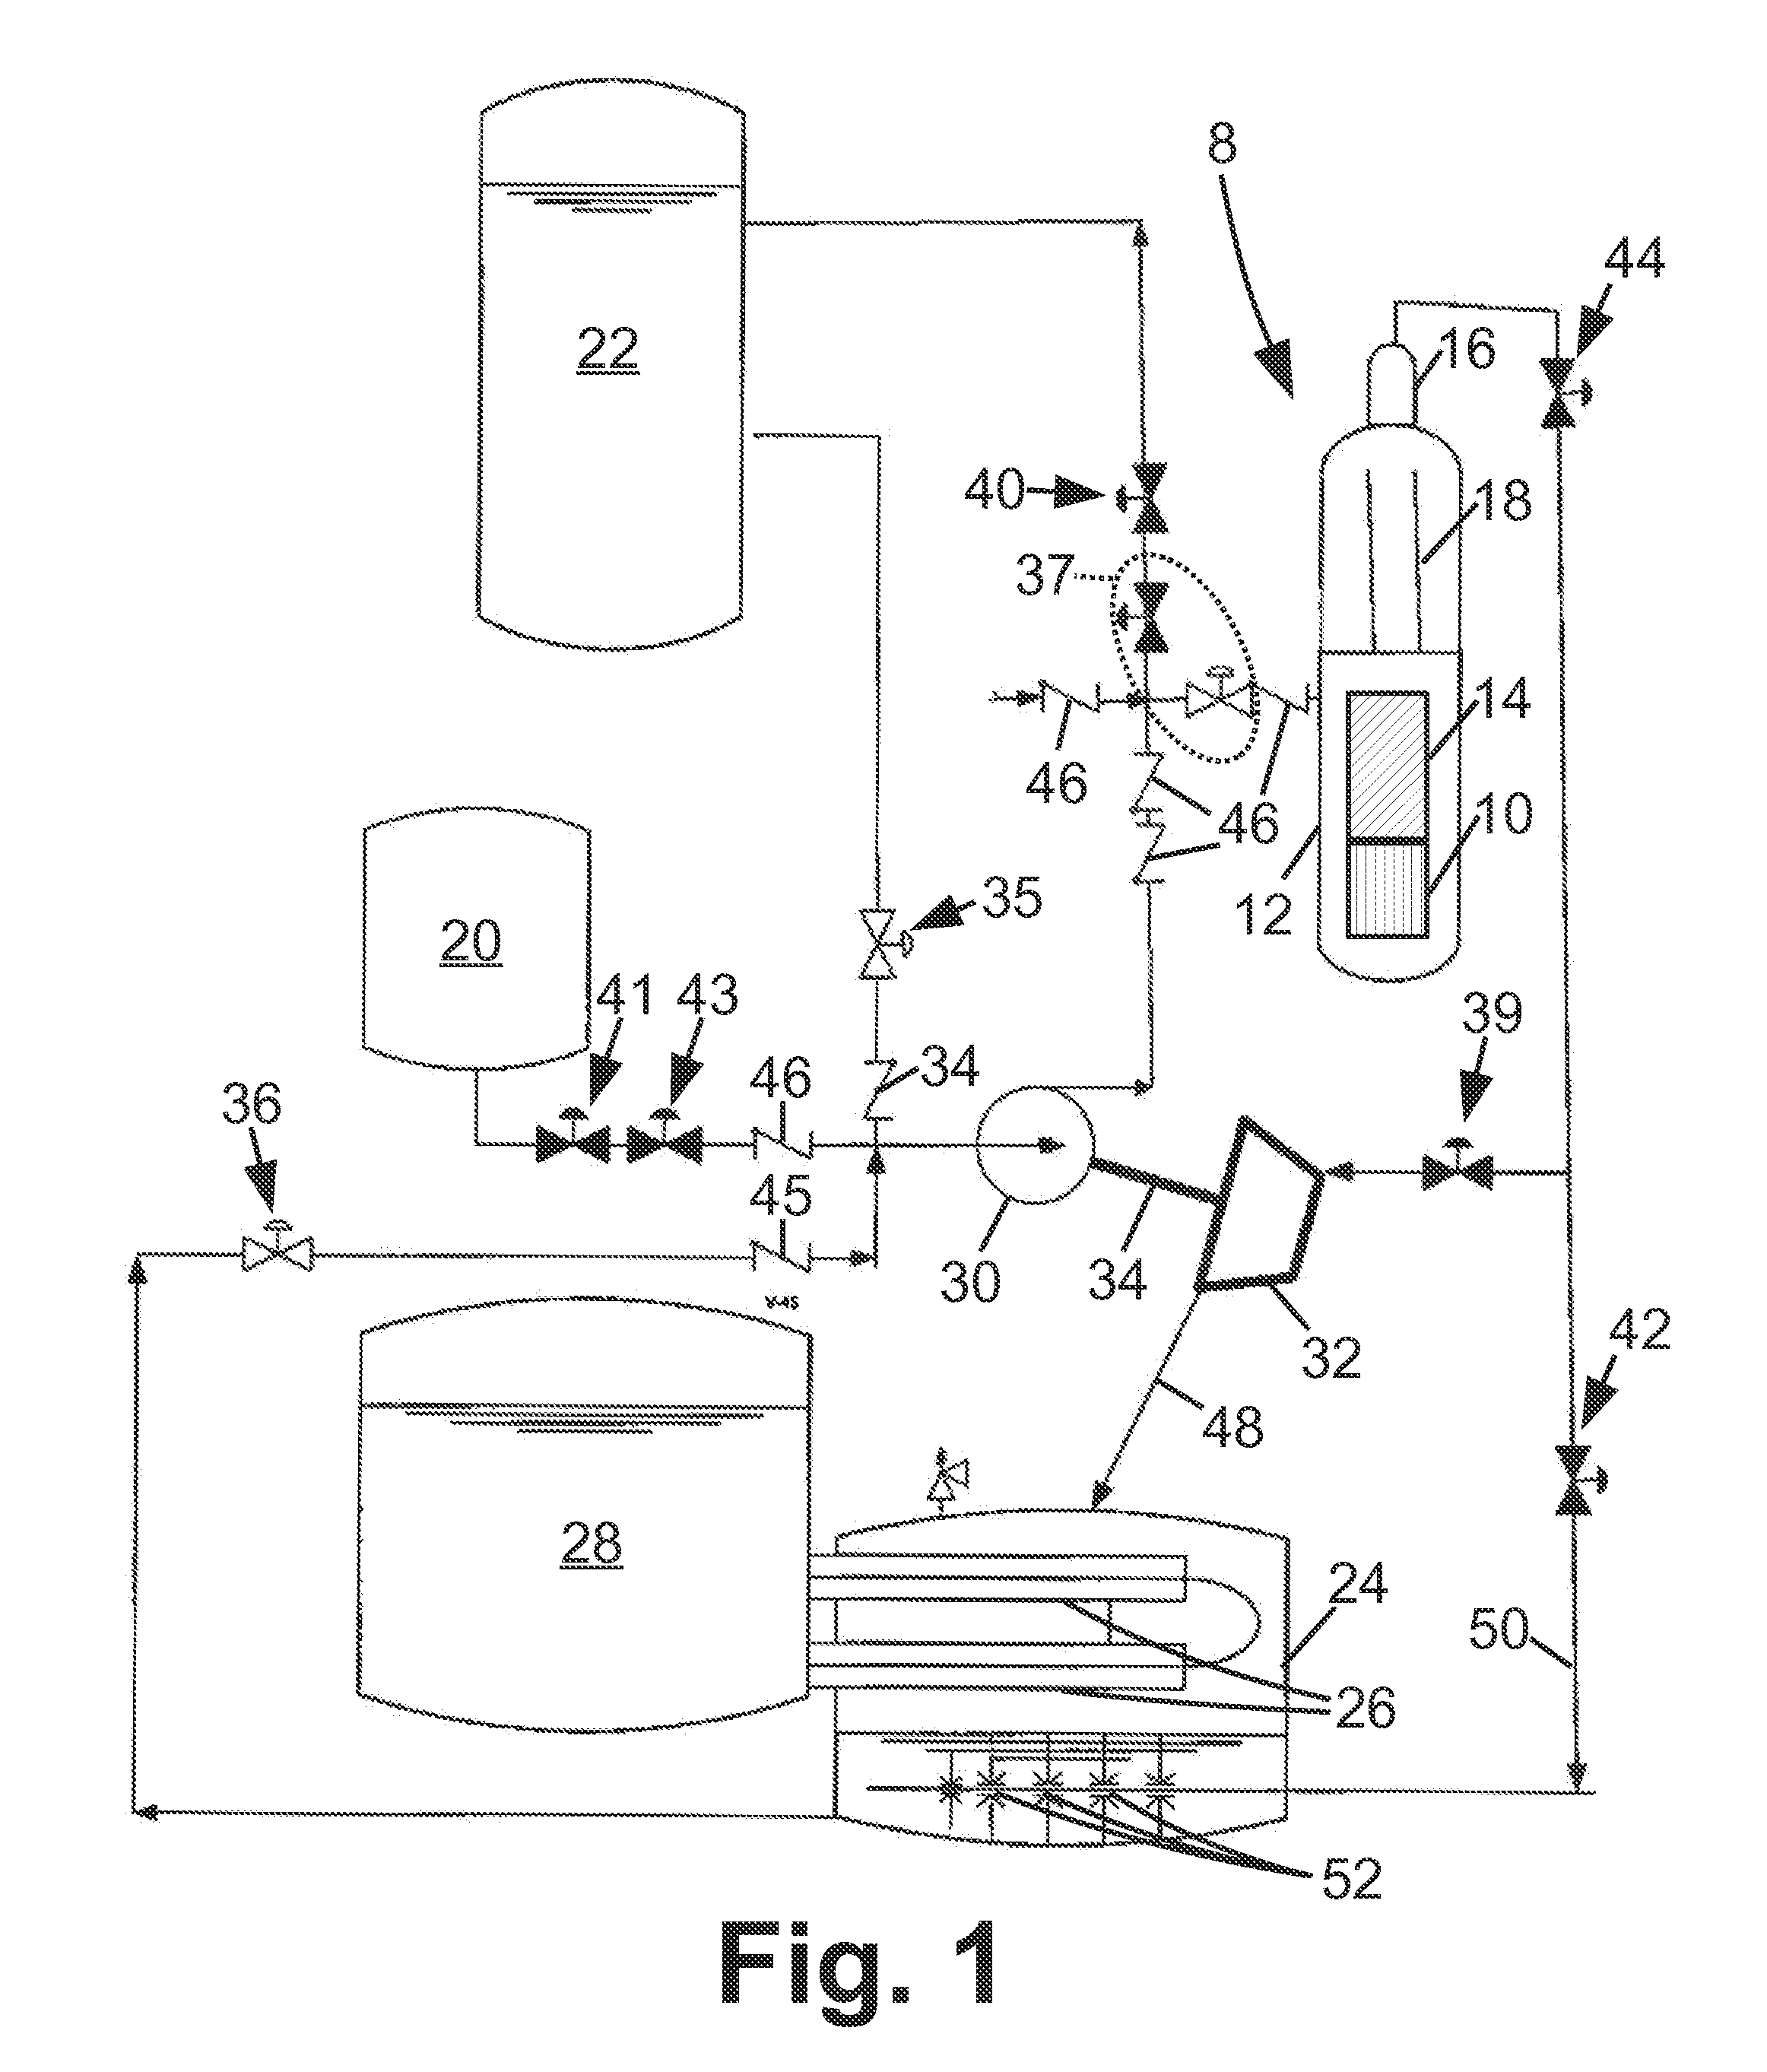 Alternative safety function system for nuclear reactor